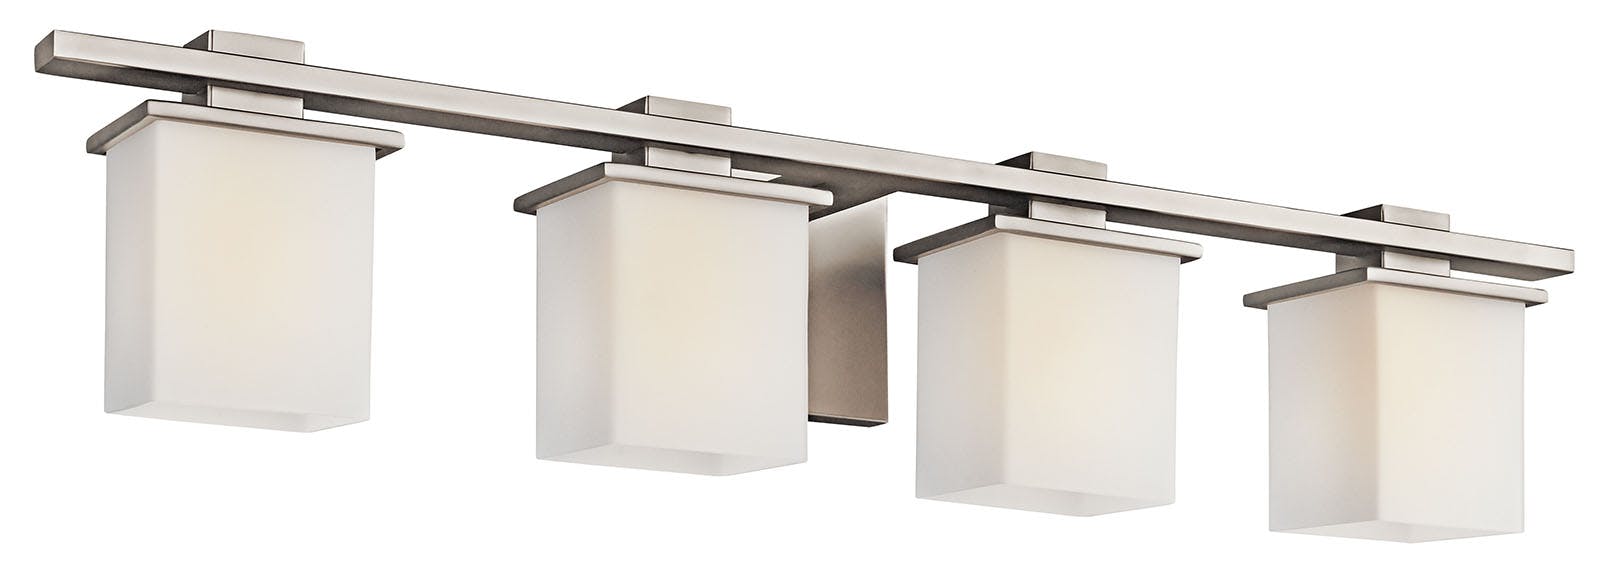 The Tully 32" 4 Light Vanity Light Pewter facing down on a white background